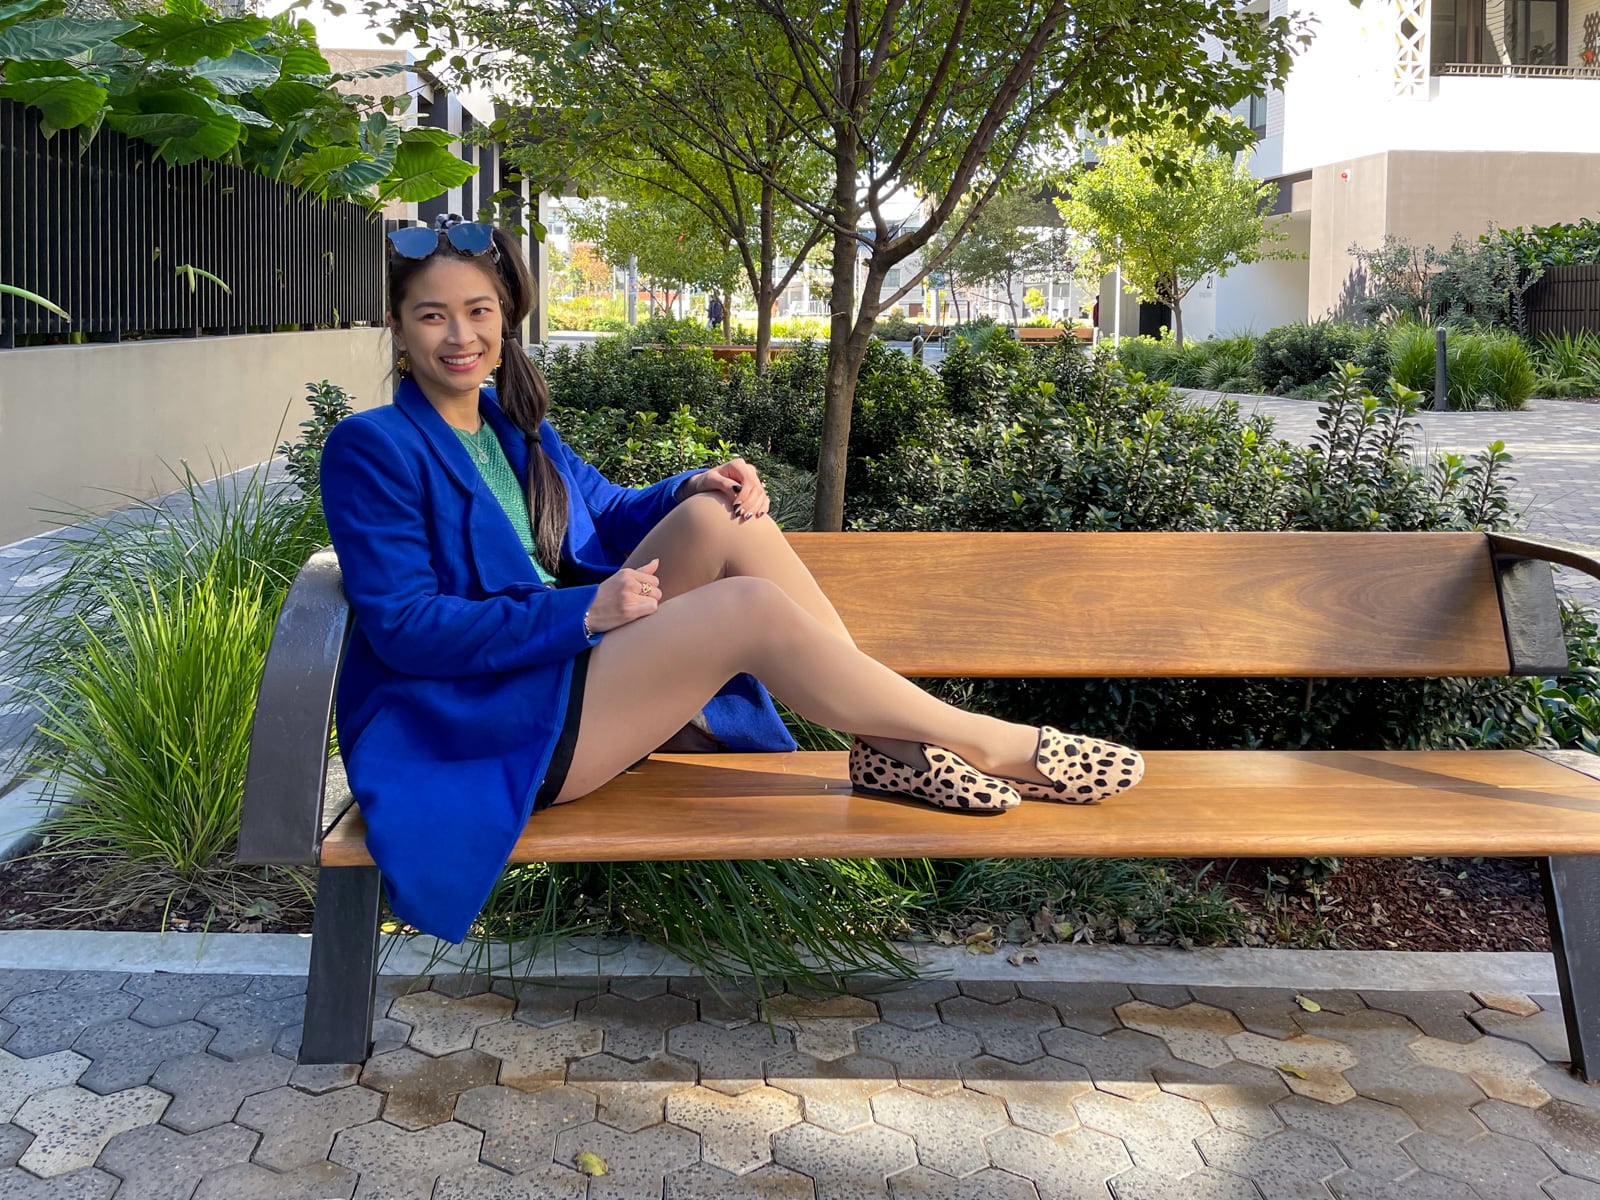 An Asian woman with dark hair tied in a ponytail with tied sections, sitting on a wooden bench sideways. She is wearing a bright blue coat, a green top and black shorts, and giraffe print loafers. She has sunglasses on top of her head.